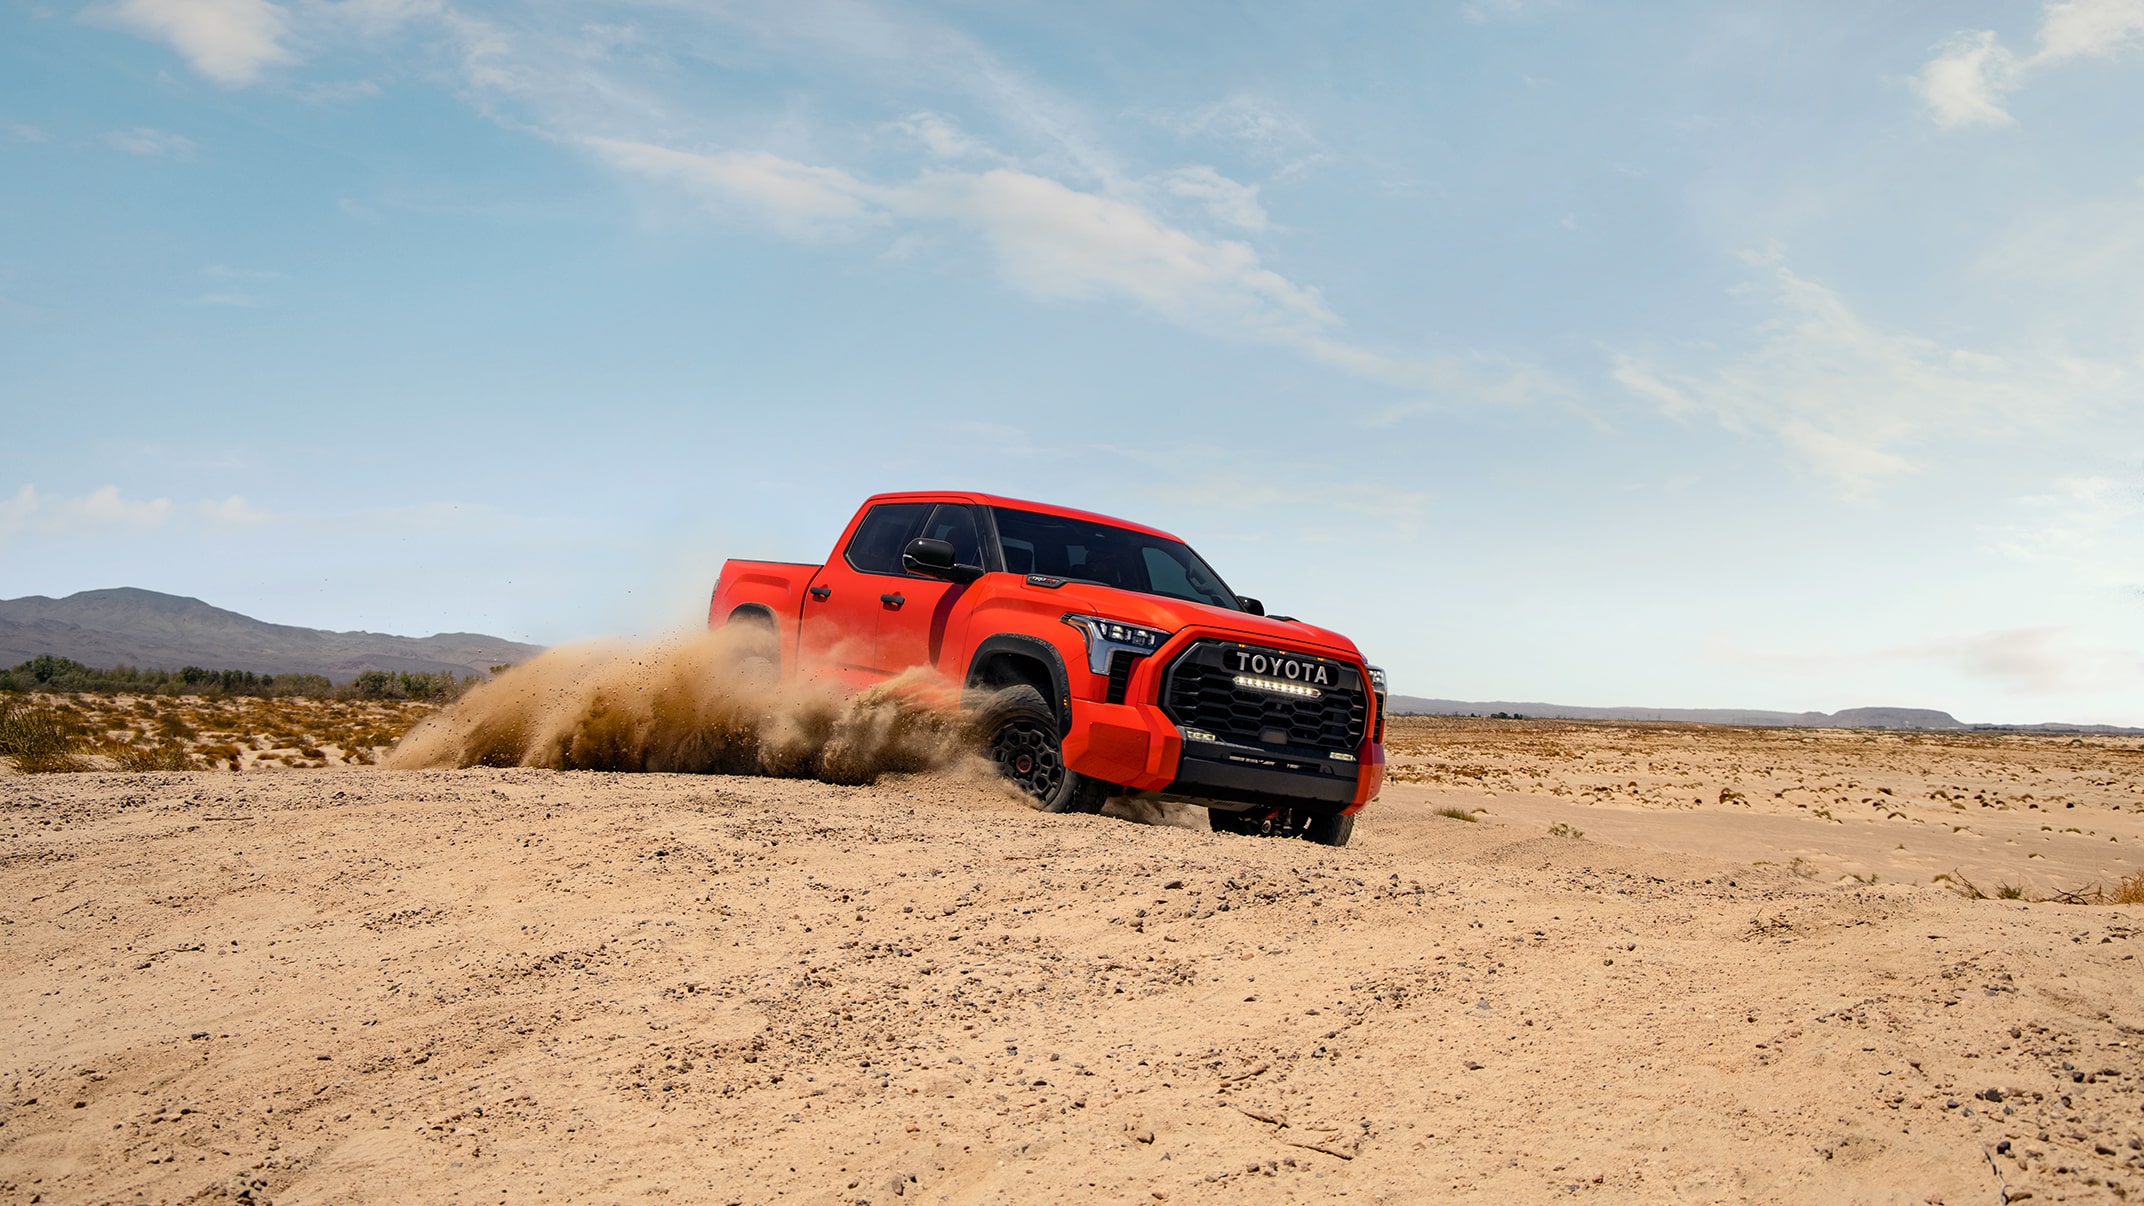 The Tundra TRD Pro kicks up dirt in the desert. A slider divides the image in half, showing what it looks like when color profile is added to the image.